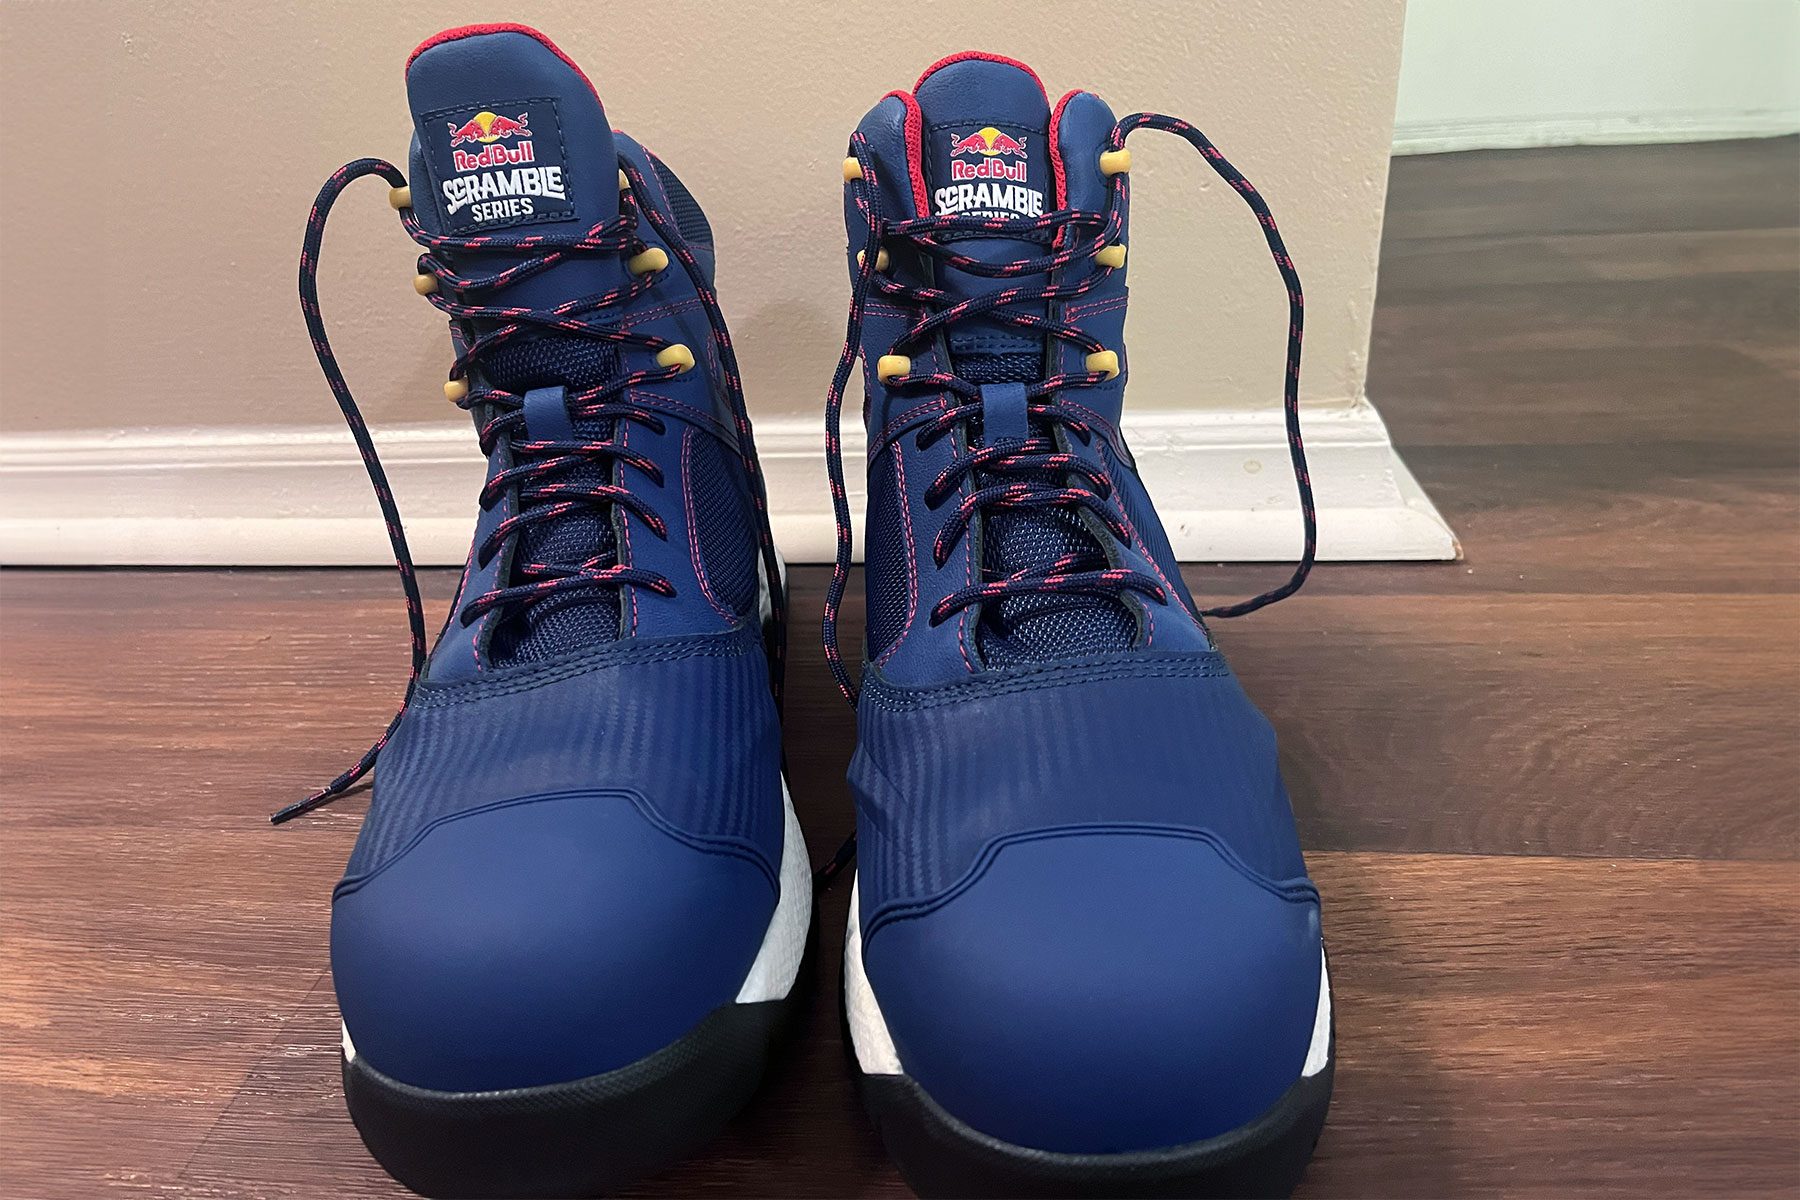  Wolverine Hiking Boots Get A Red Bull Themed Makeover on wooden surface